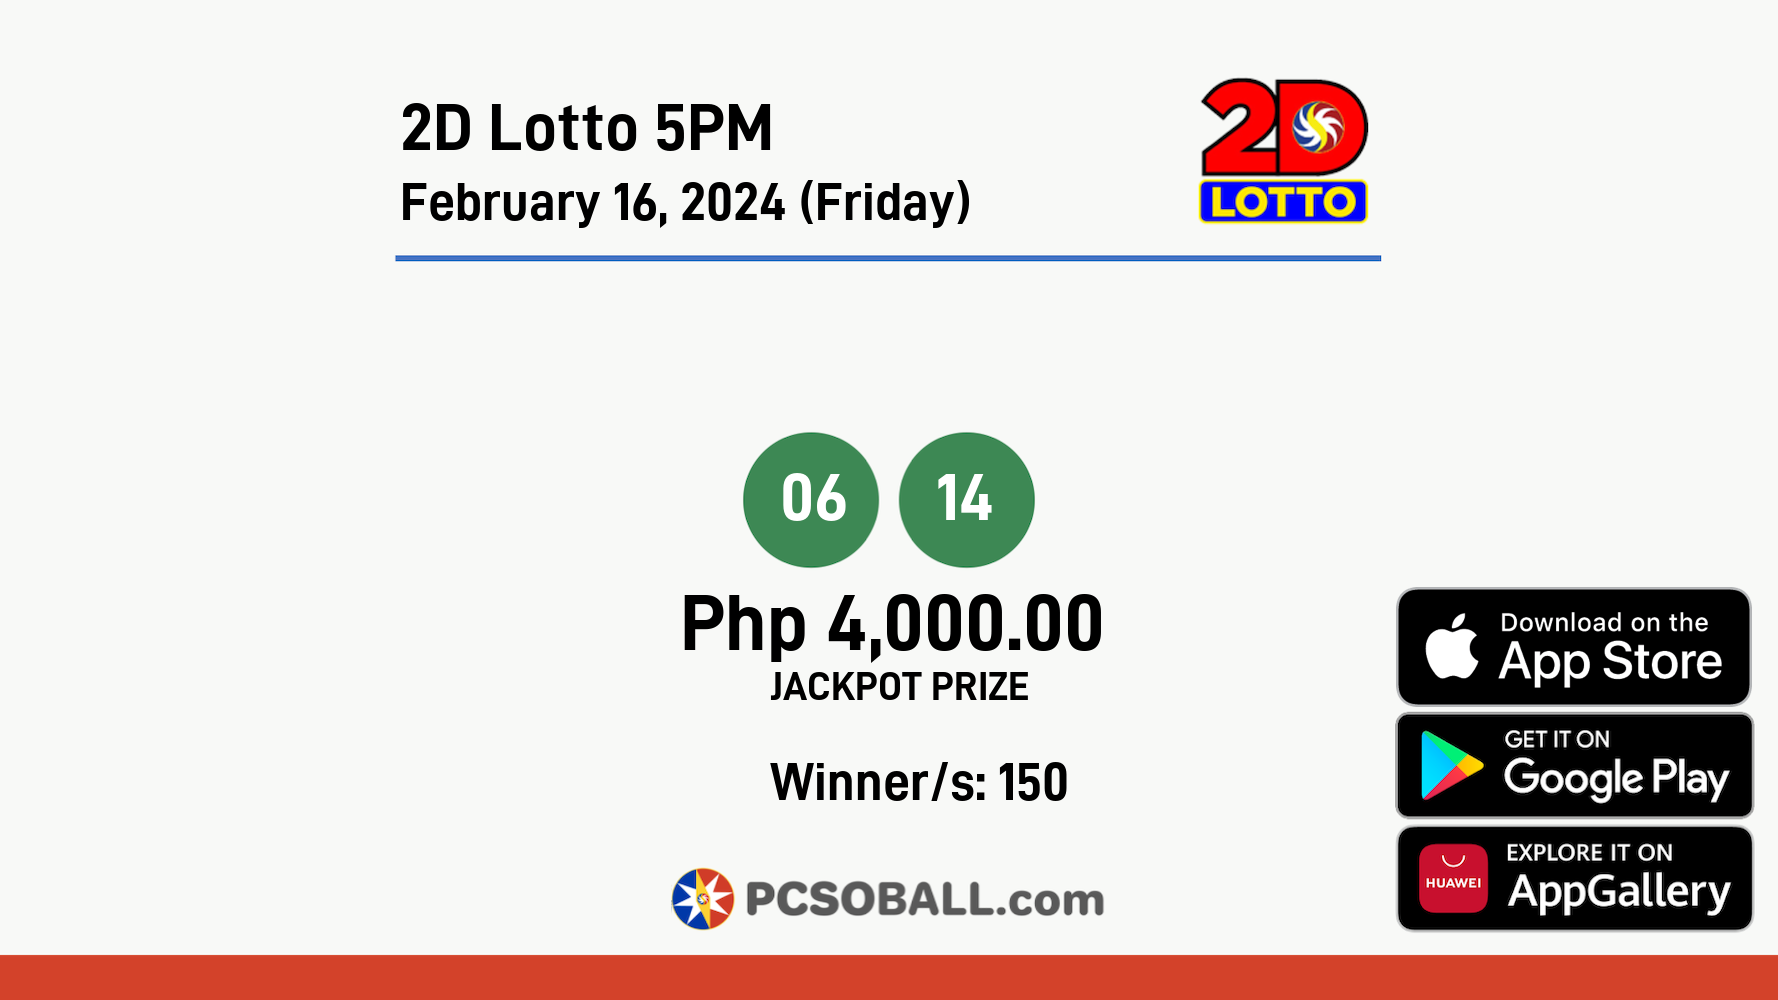 2D Lotto 5PM February 16, 2024 (Friday) Result